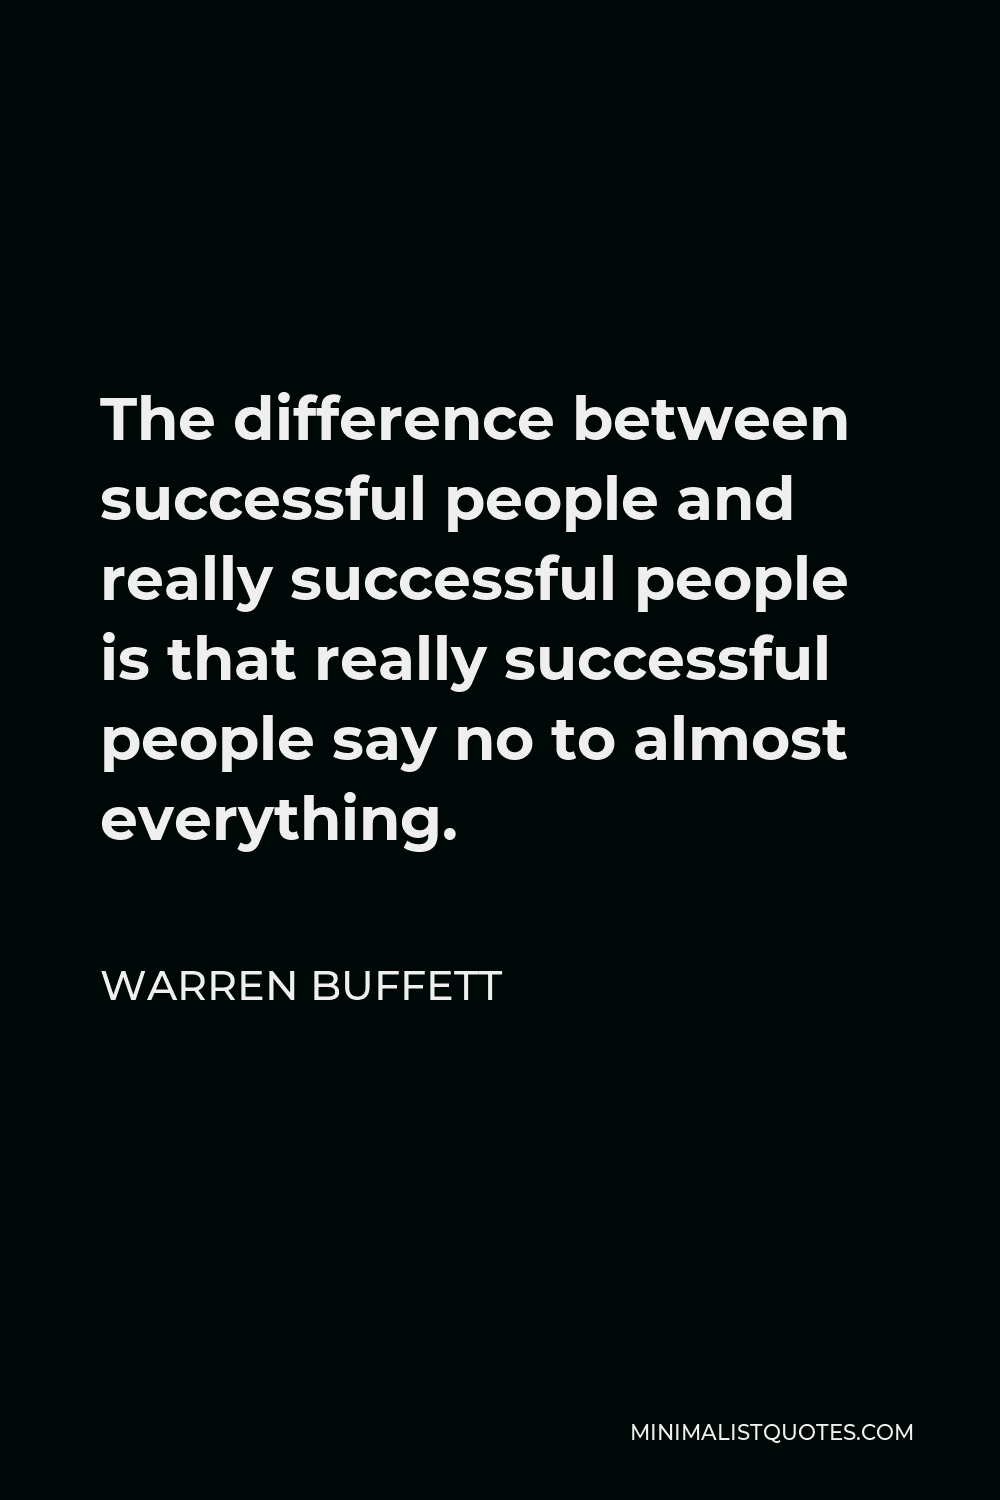 Warren Buffett Quote - The difference between successful people and really successful people is that really successful people say no to almost everything.